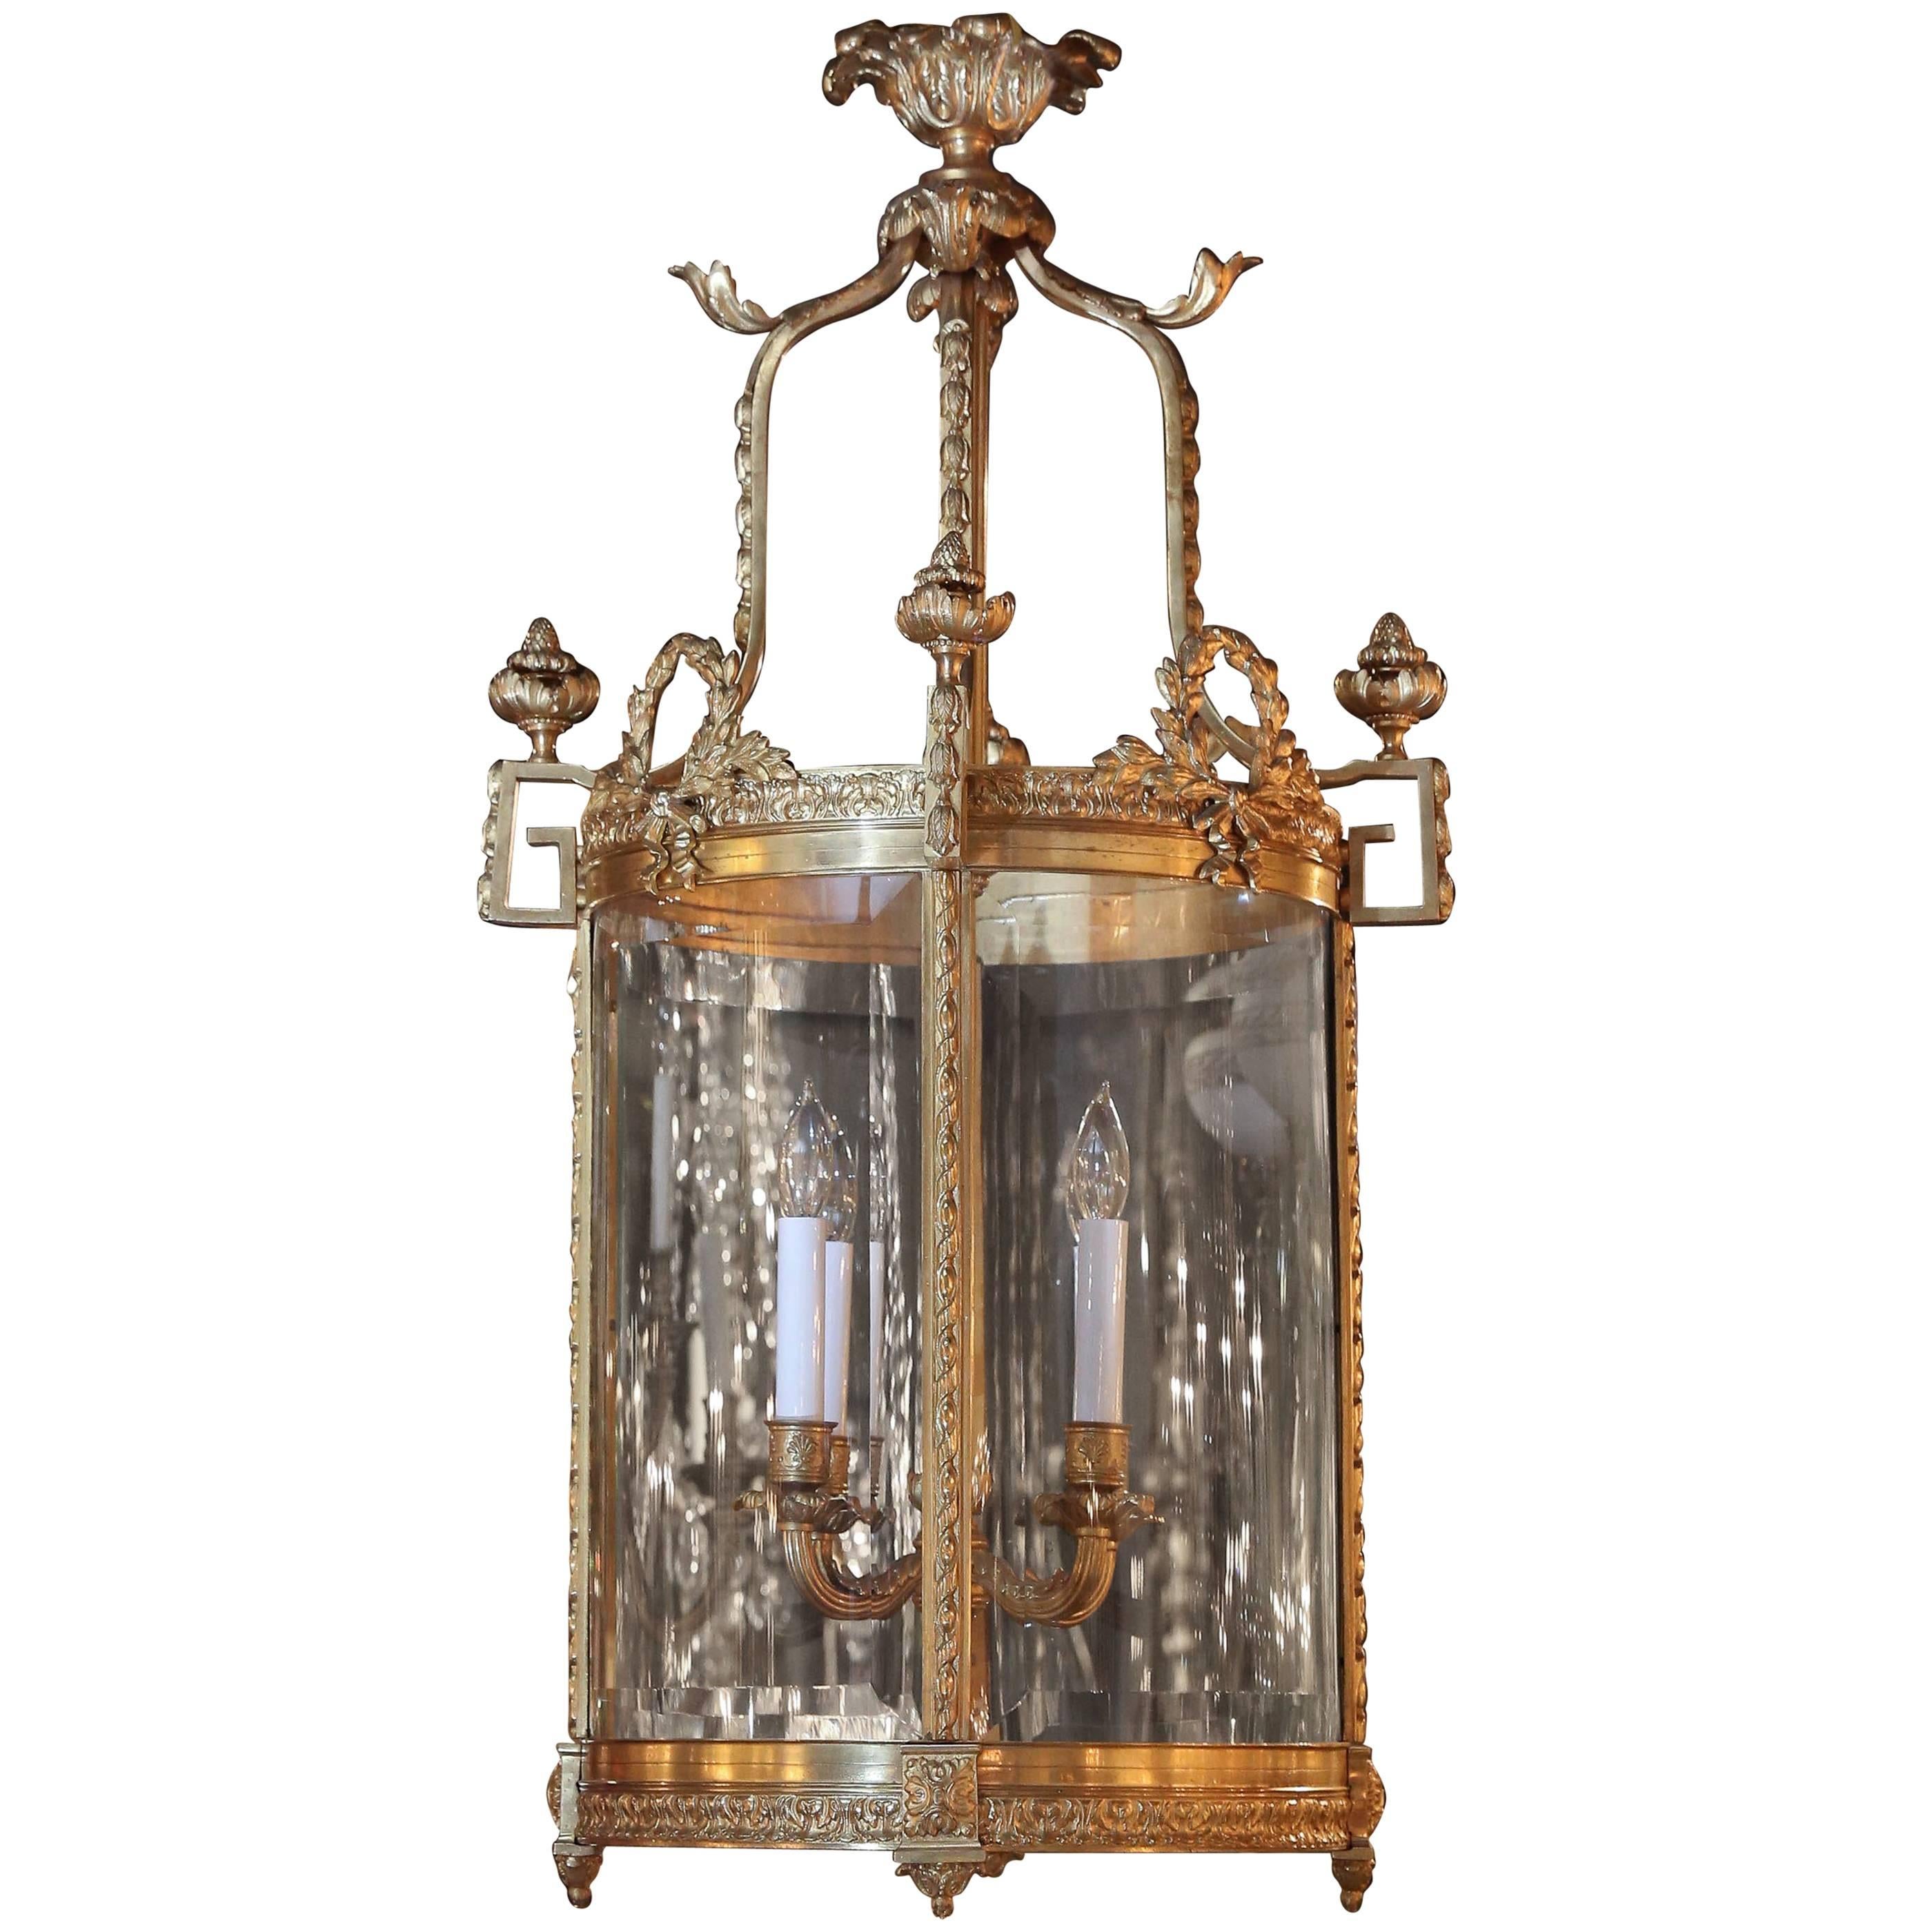 French Bronze Doré Lantern Style Chandelier, Four Lights with Beveled Glass